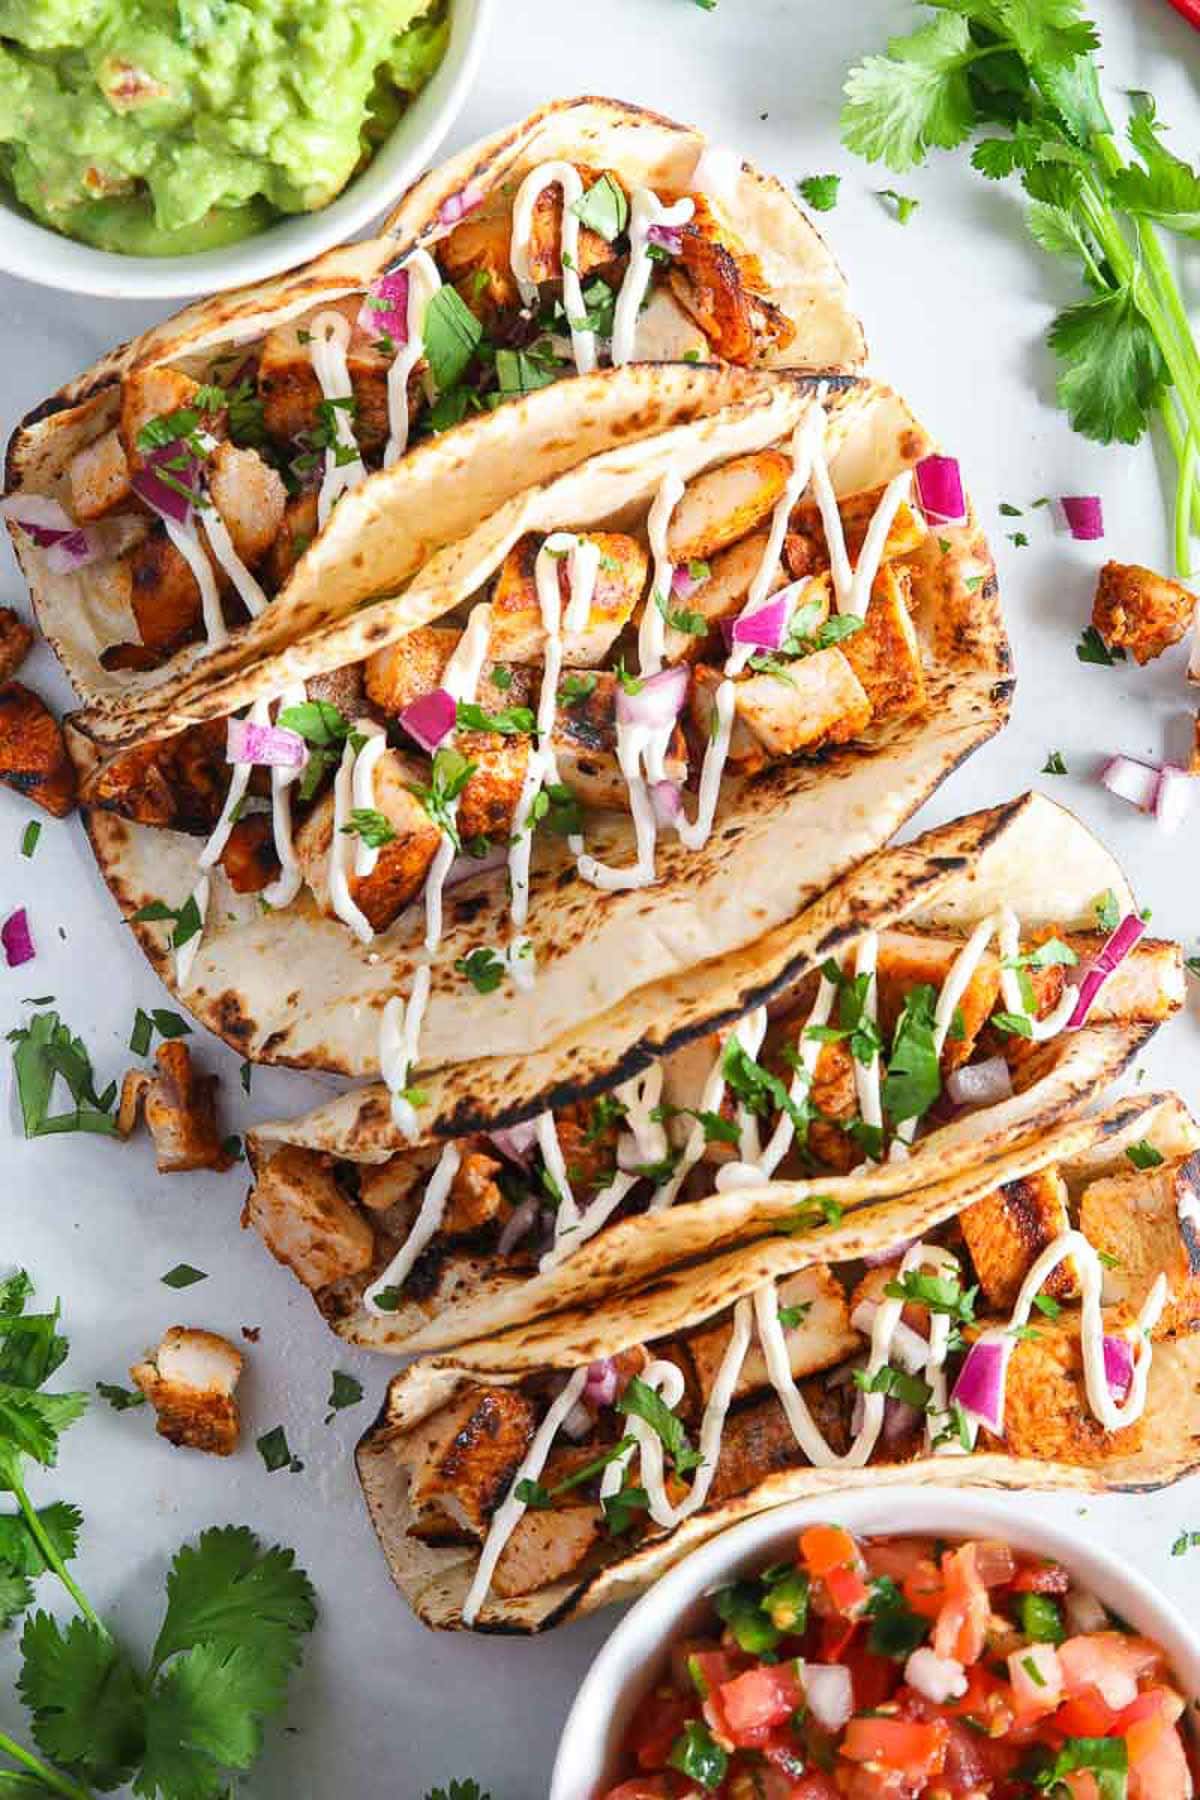 Chicken street tacos on a plate garnished with cilantro, red onion and white sauce.